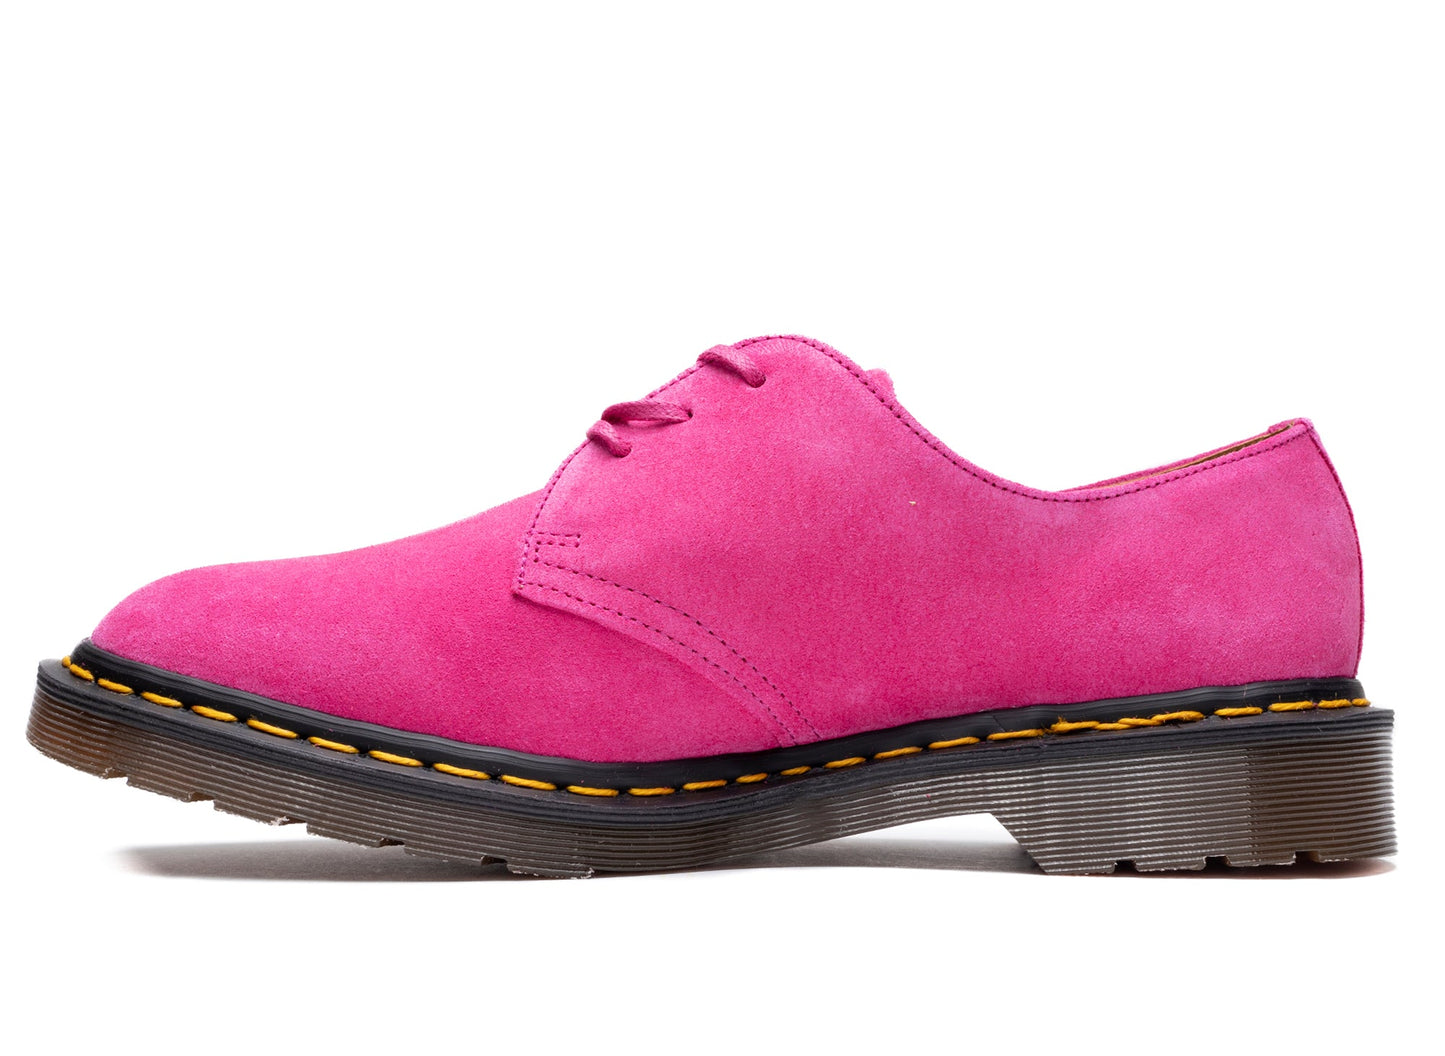 Dr. Martens 1461 Made in England Buck Suede Oxford